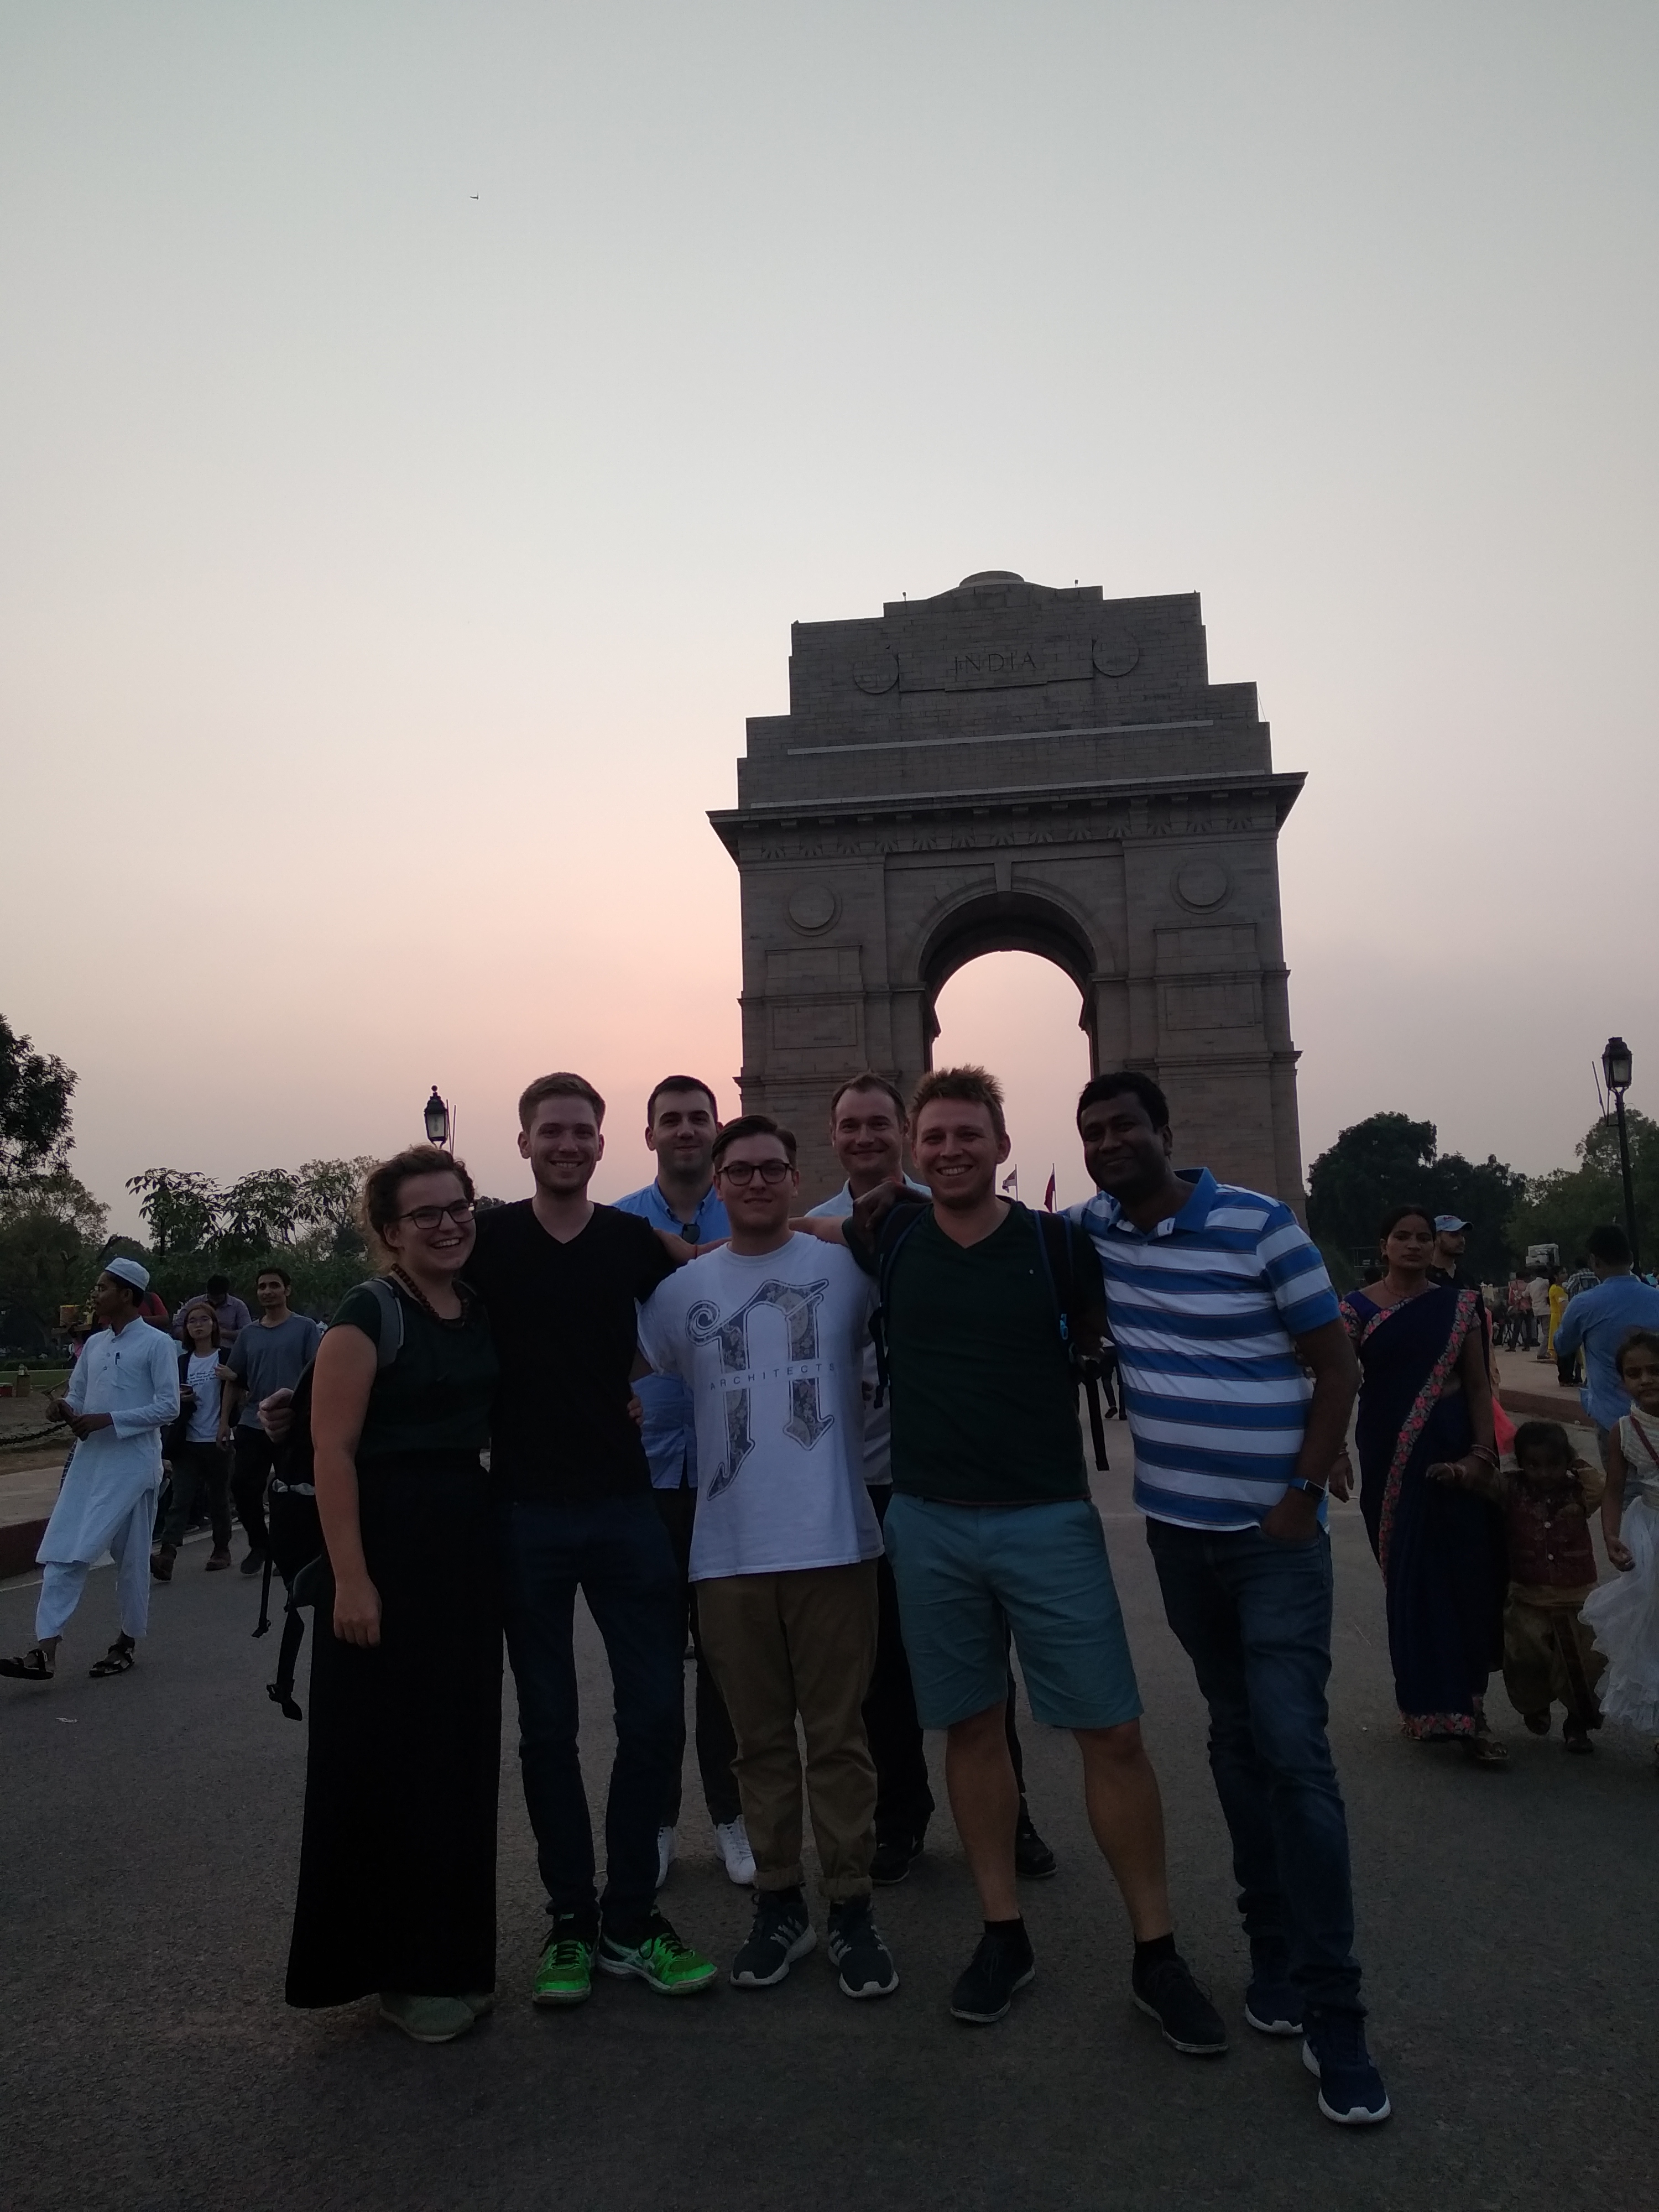 Luise, Lars, Christopher, Philipp, Dr. Thiede, Frank and Rishi front of India Gate